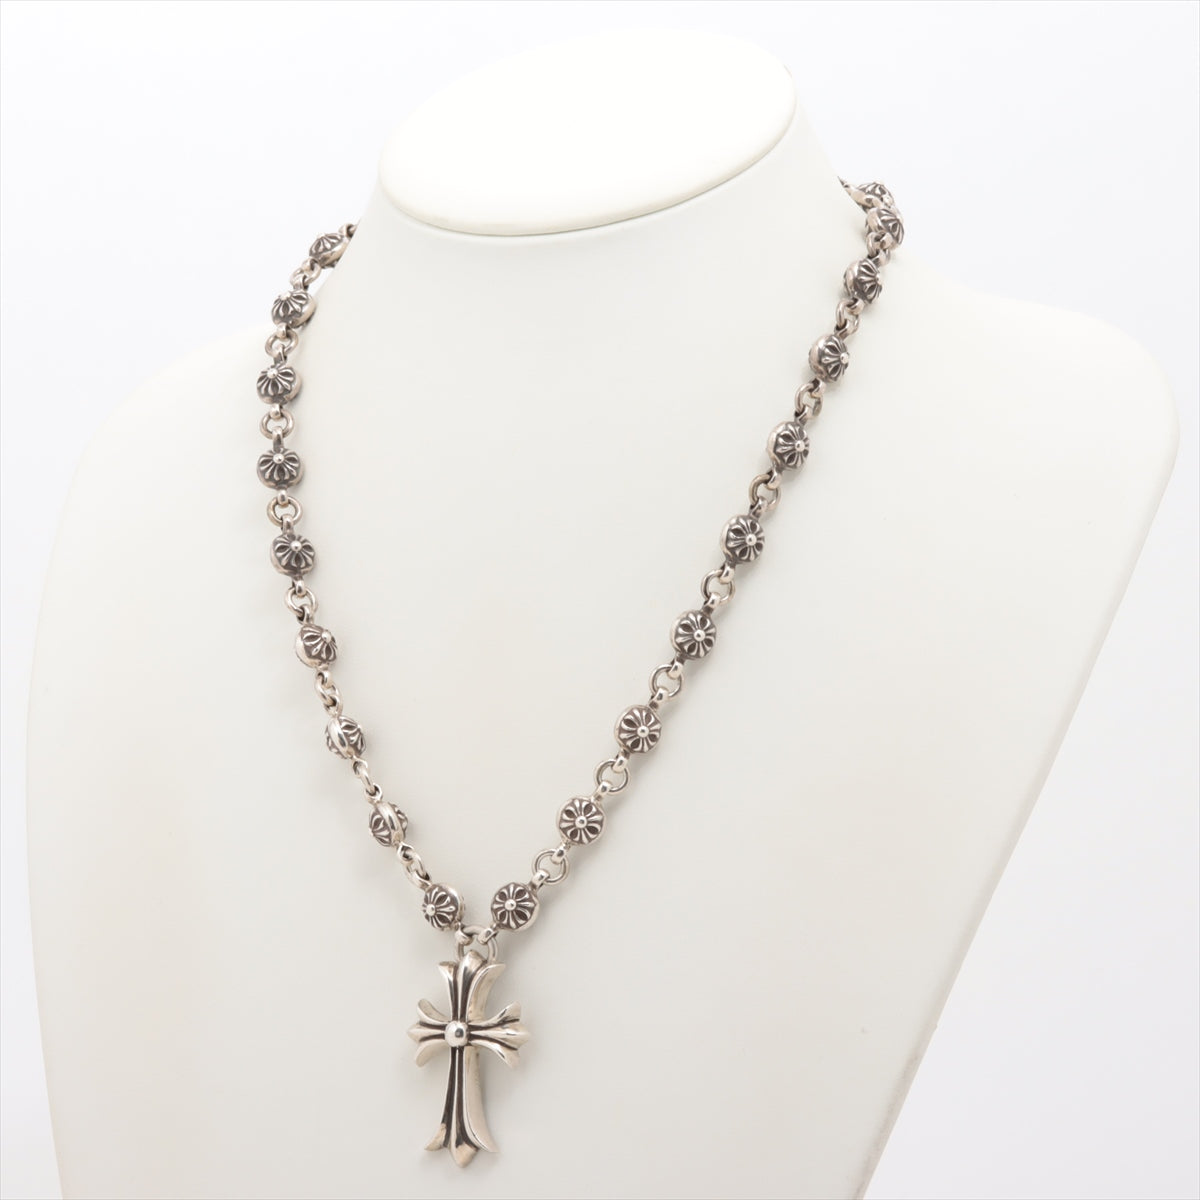 Chrome Hearts Small CH cross Necklace 925 118.8g #1 Cross Ball Chain